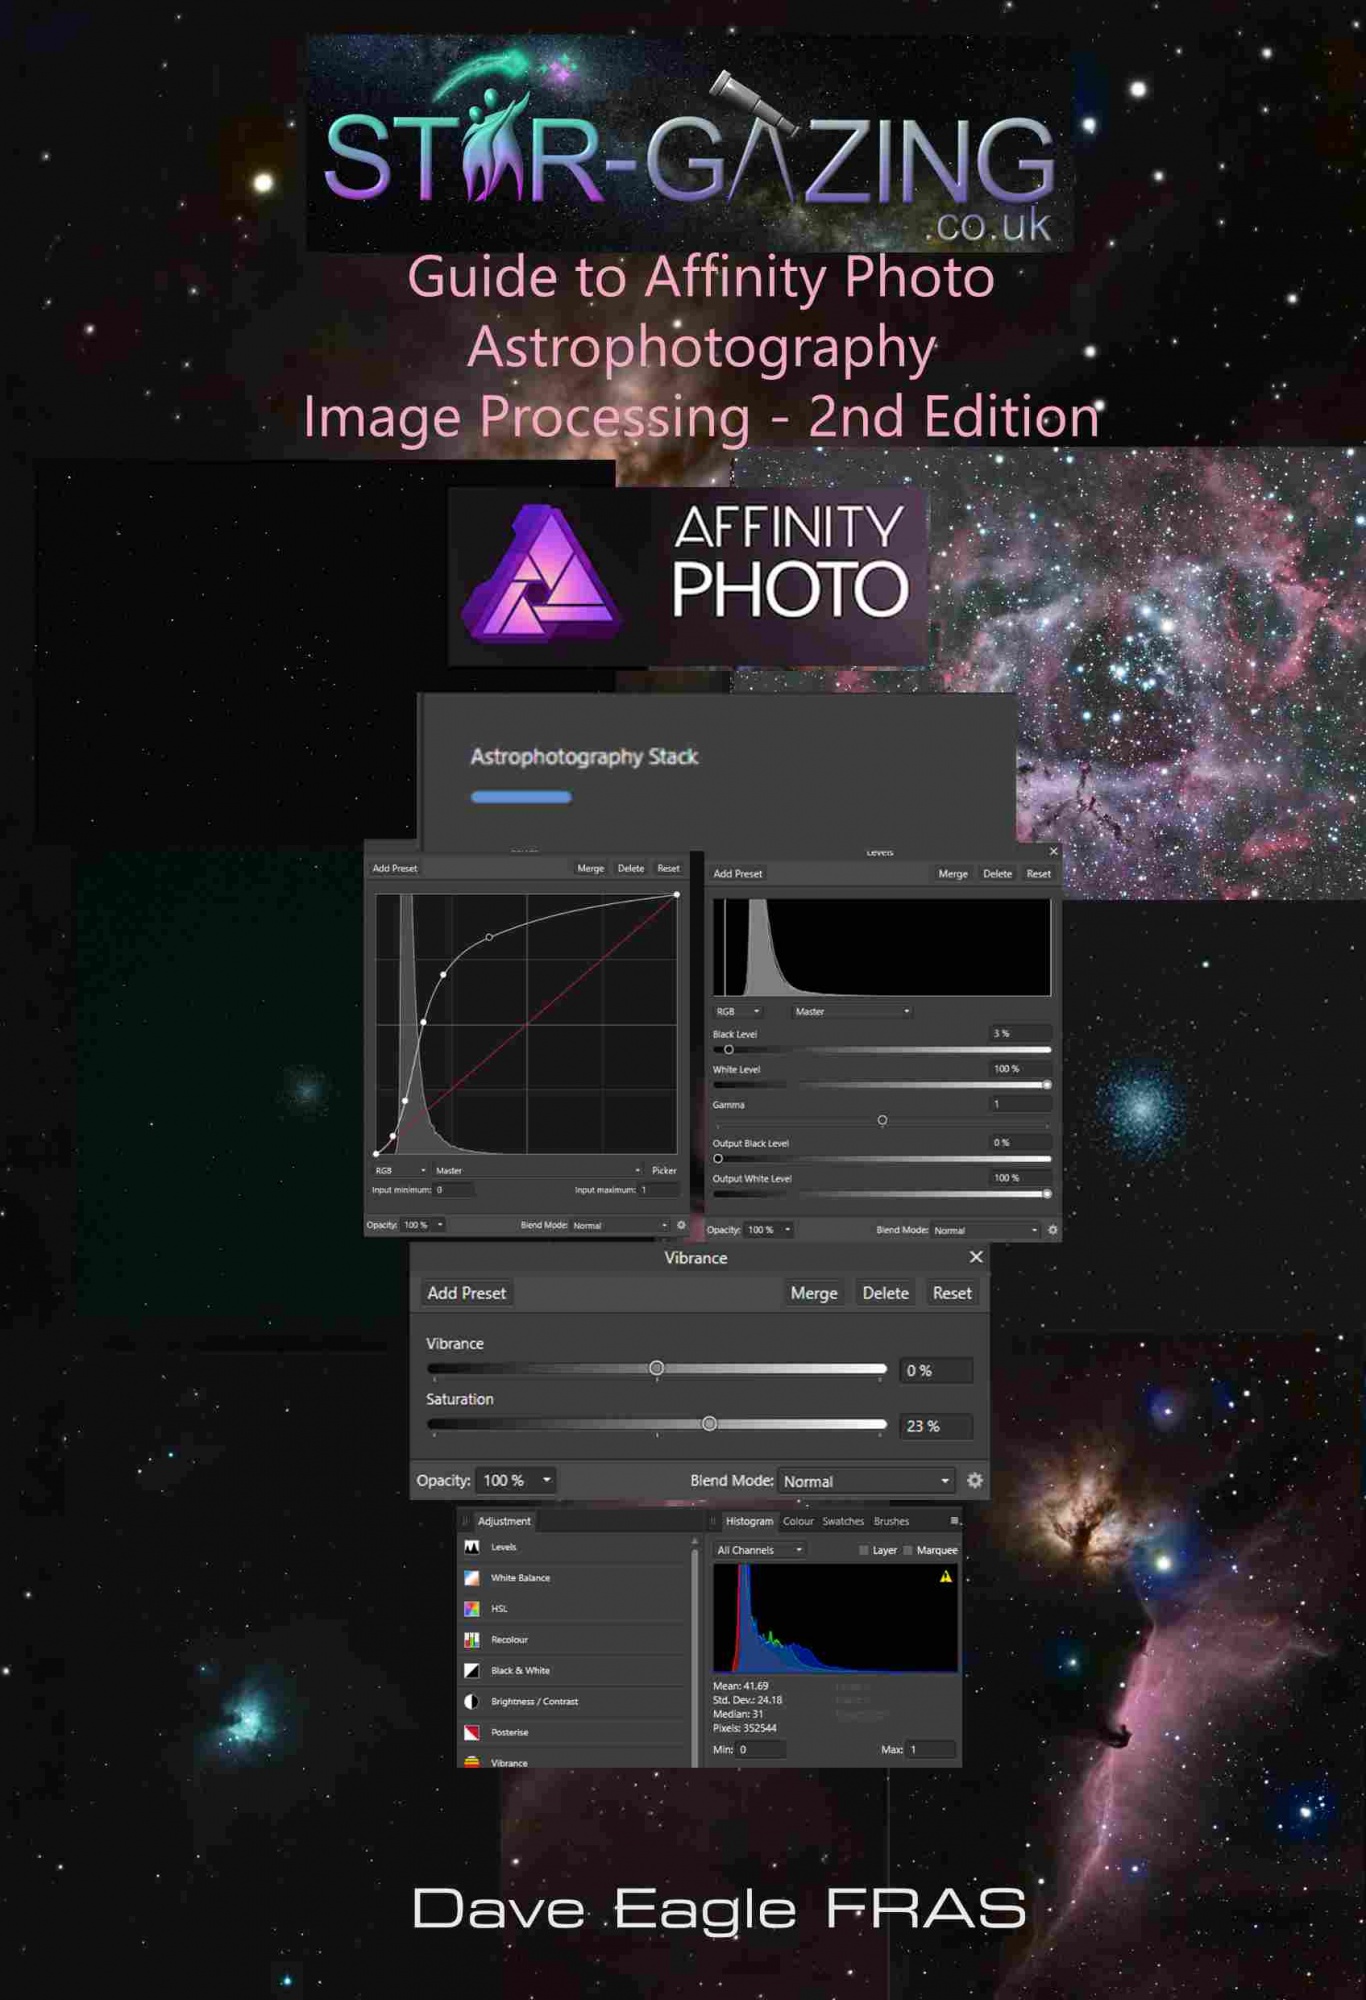 Affinity Photo Astrophotography Image Processing Guide (Second Edition)